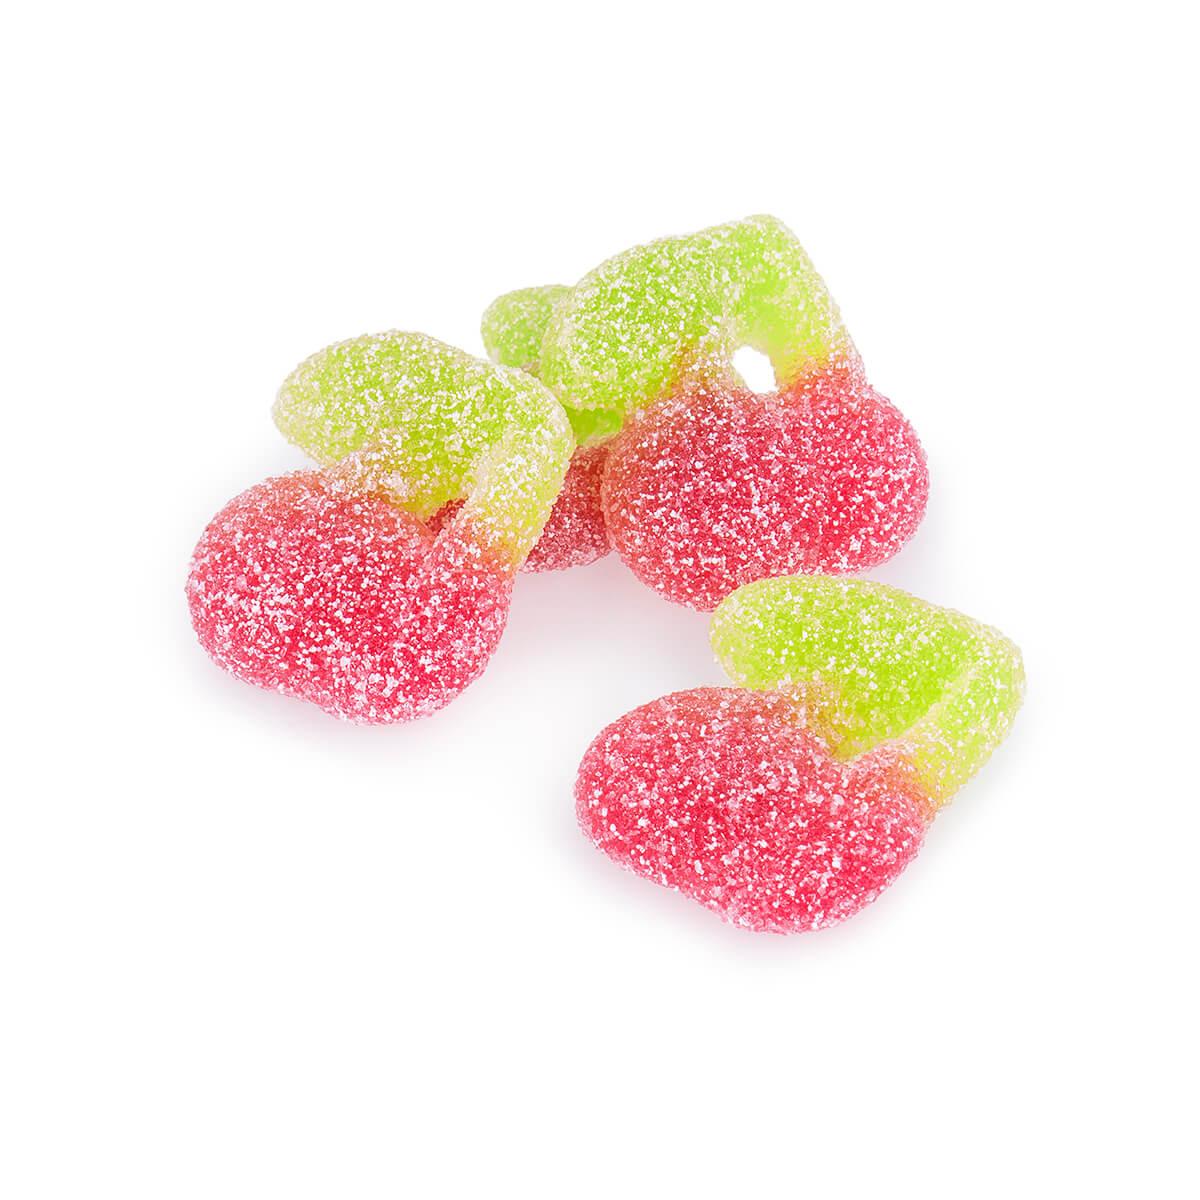  Sour Twin Cherries Candy - 1 Lb.